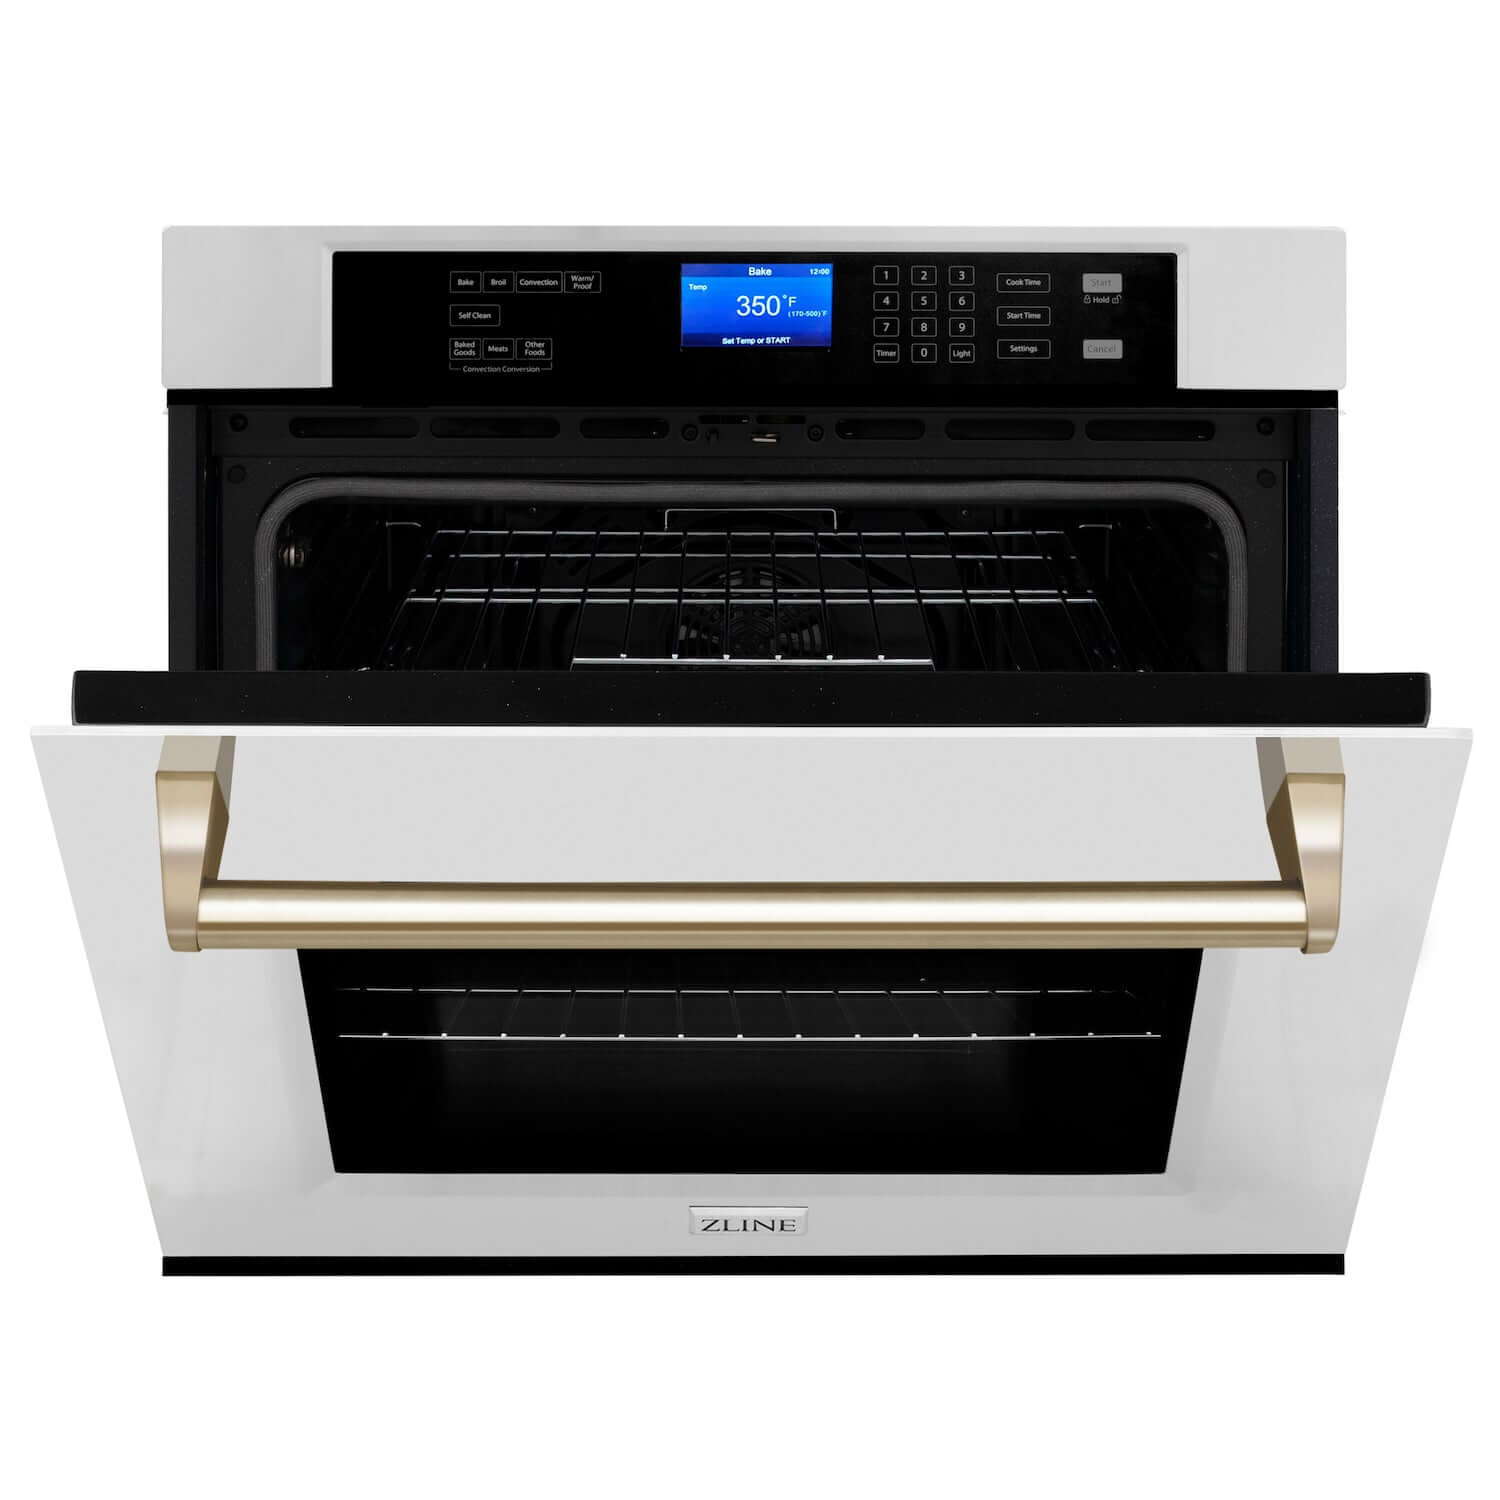 ZLINE Autograph Edition 30 in. Electric Single Wall Oven with Self Clean and True Convection in Stainless Steel and Polished Gold Accents (AWSZ-30-G) front, half open.